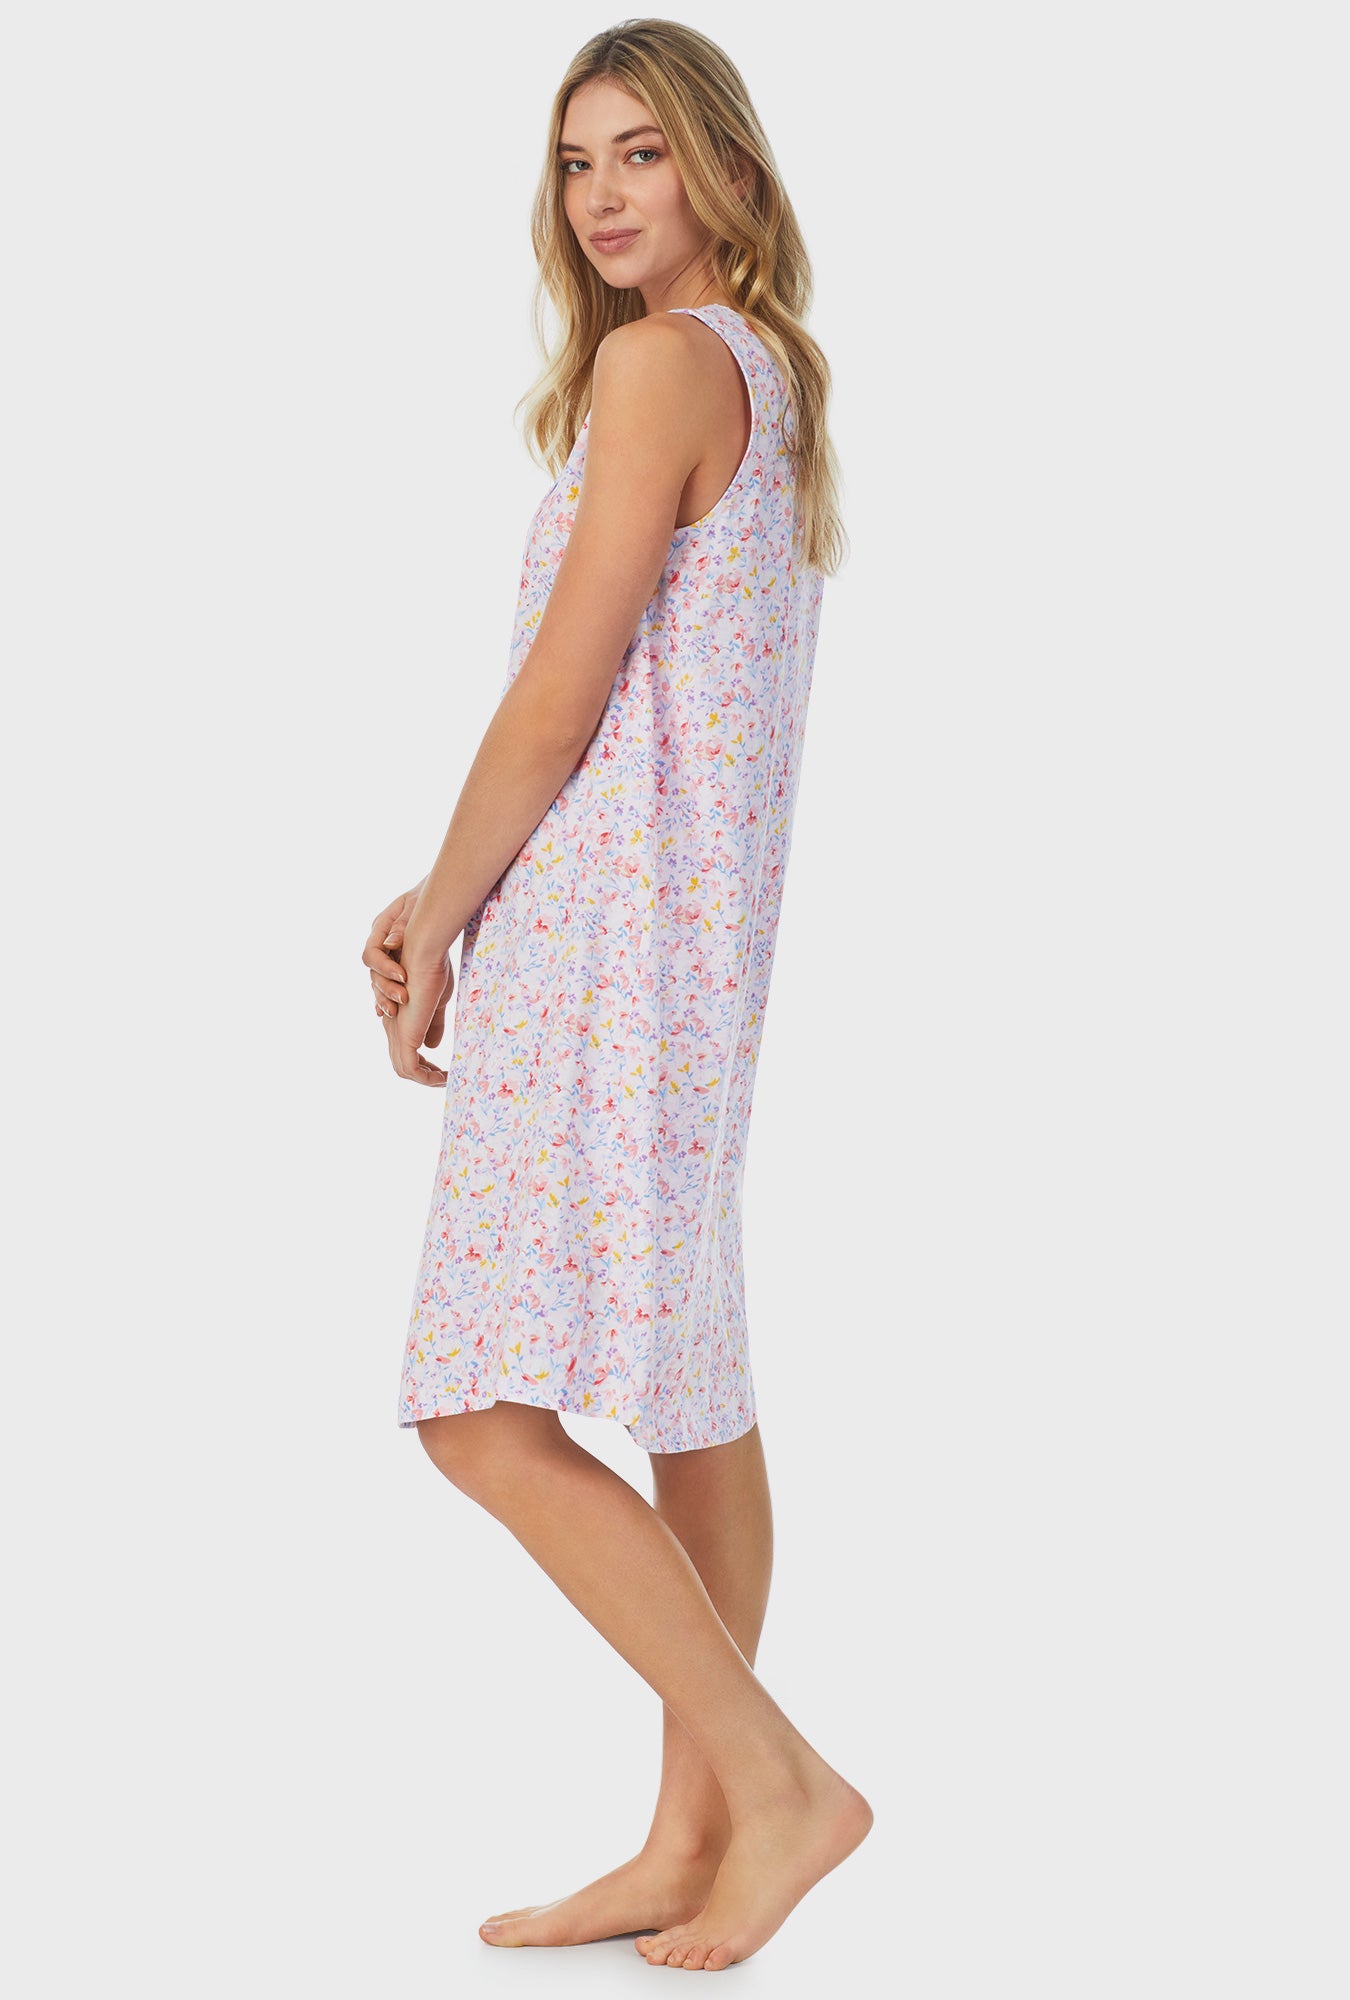 A lady wearing white sleeveless Waltz Nightgown with Garden Floral print